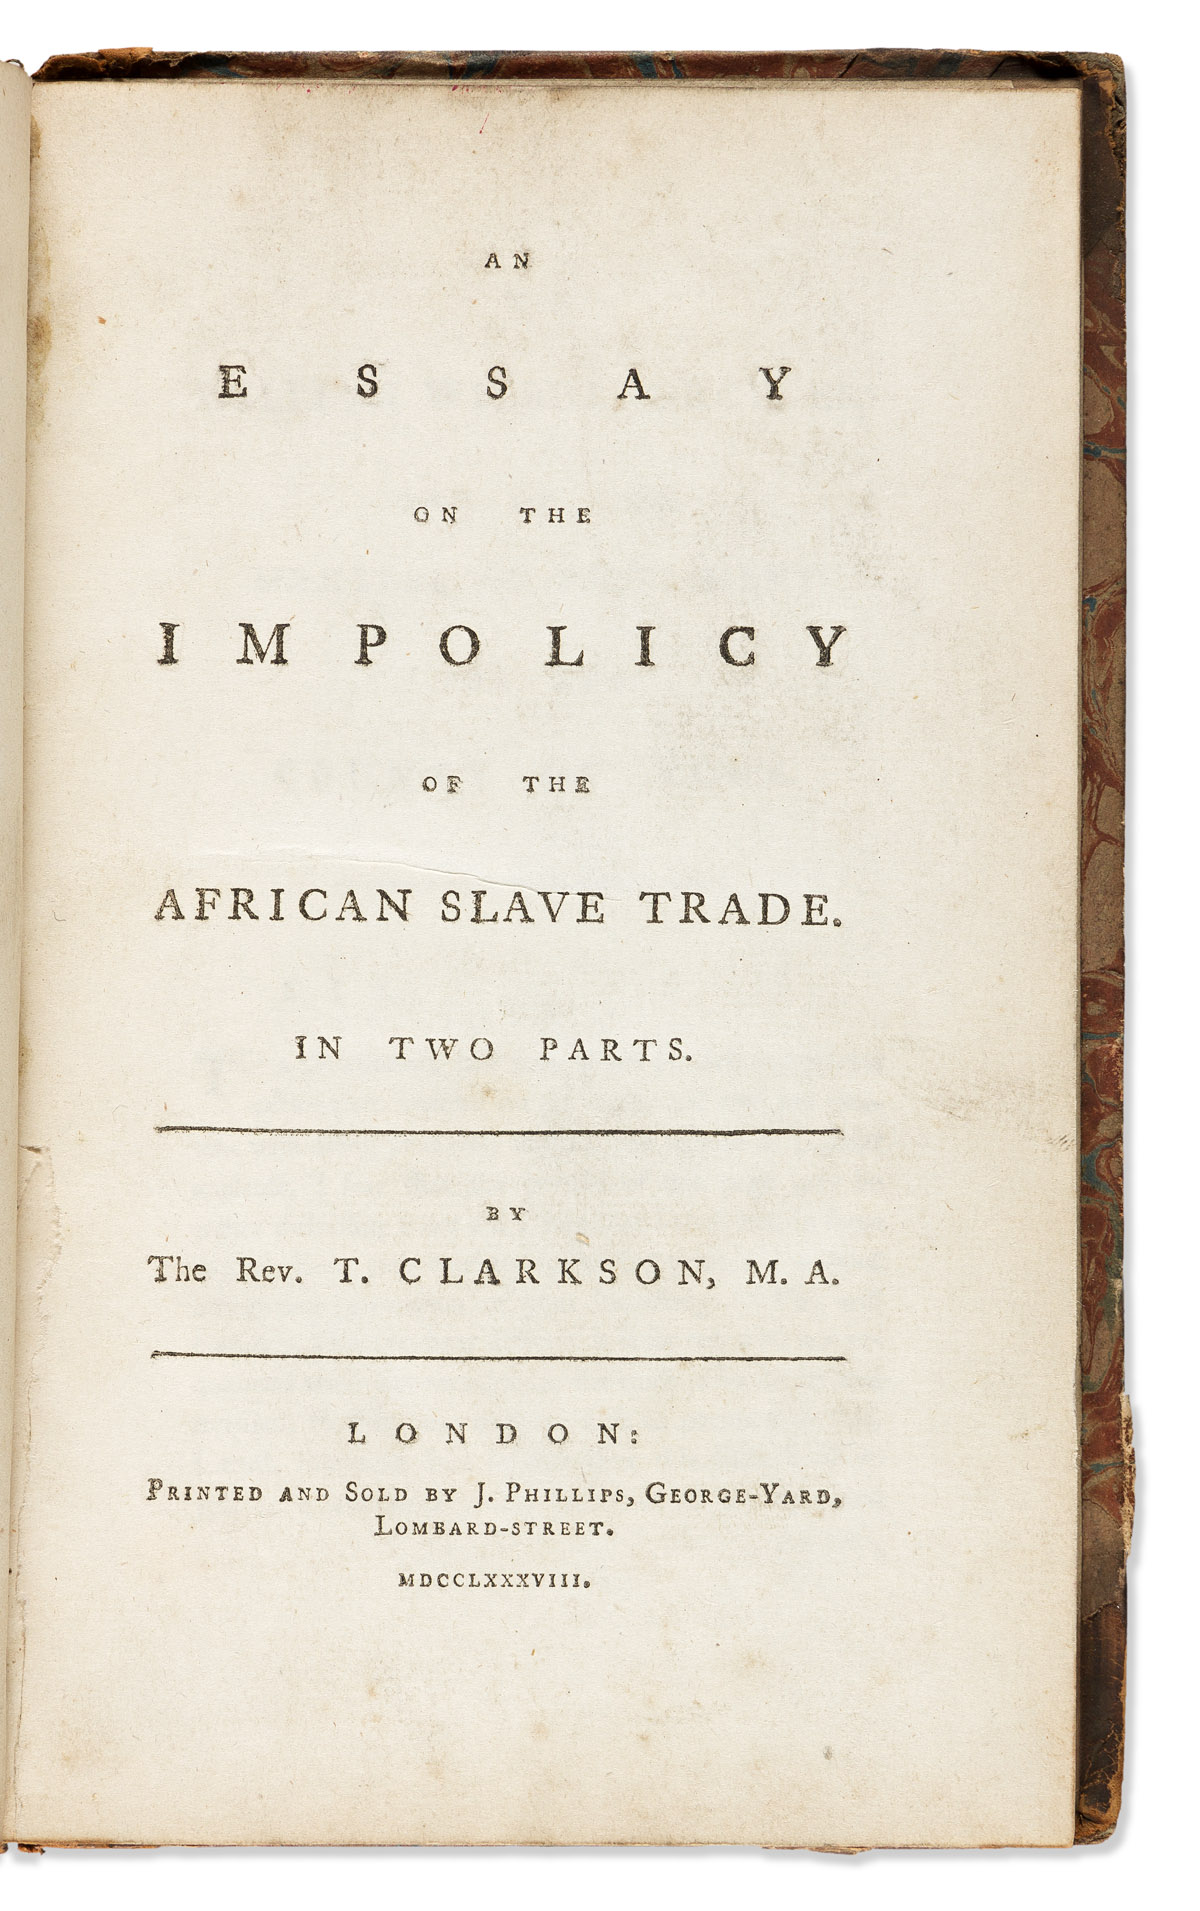 (SLAVERY & ABOLITION.) Thomas Clarkson. An Essay on the Impolicy of the African Slave Trade.